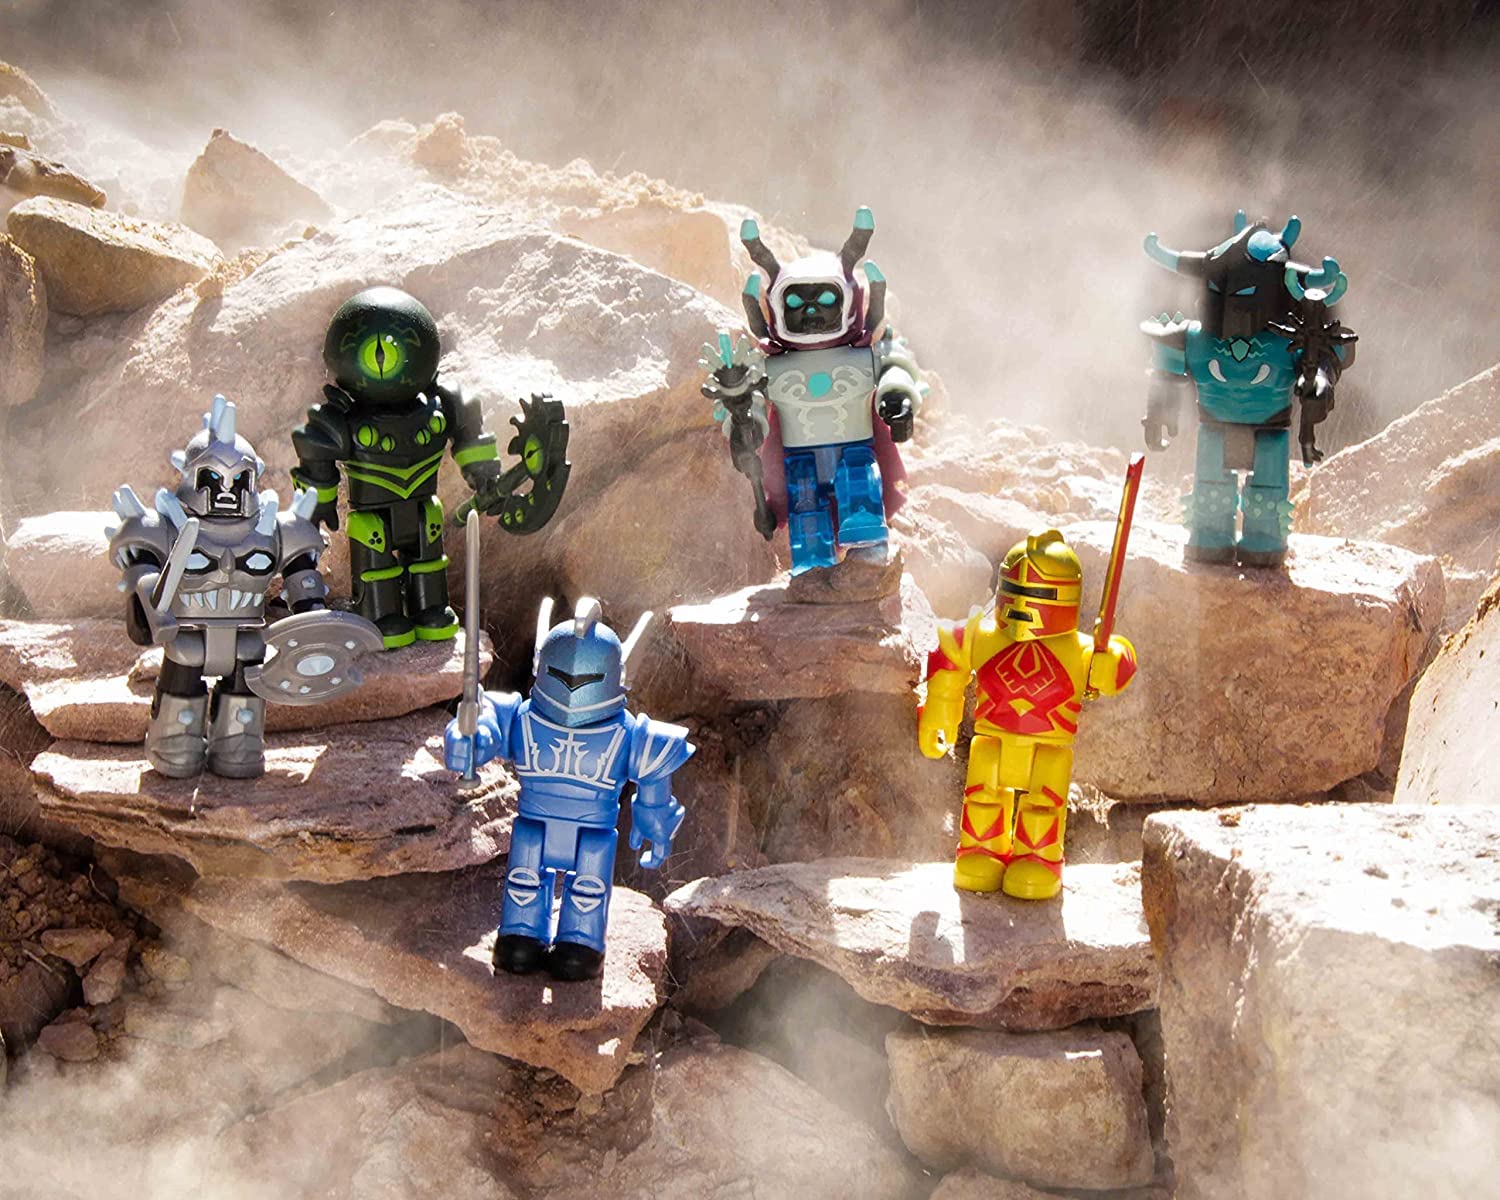 Roblox Action Collection - Champions of Roblox Six Figure Pack [Includes Exclusive Virtual Item]